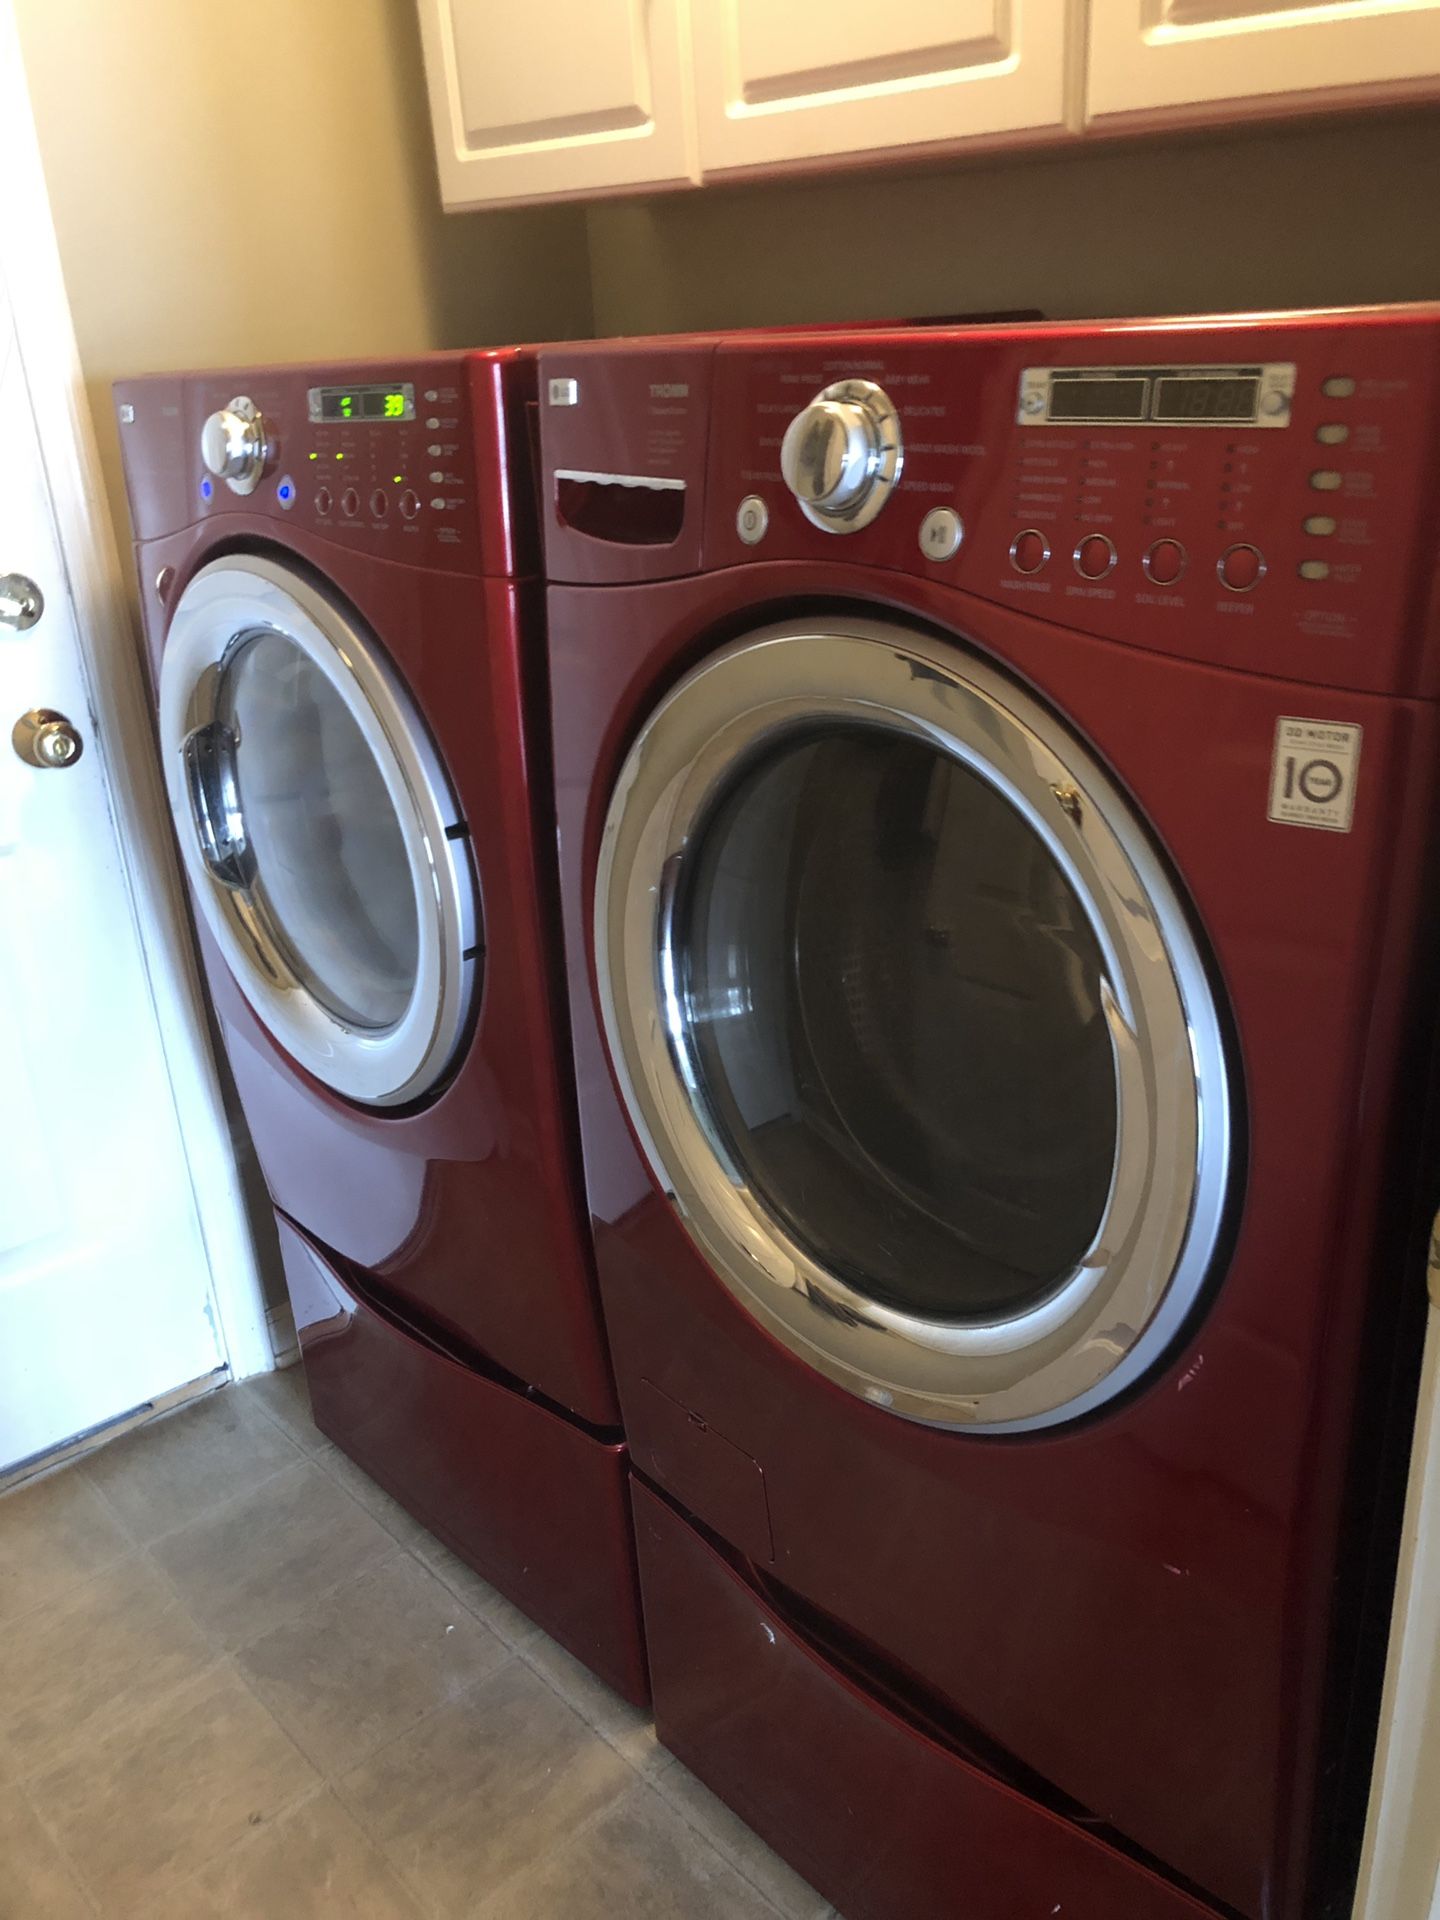 LG Tromm steam washer and dual humidity dryer